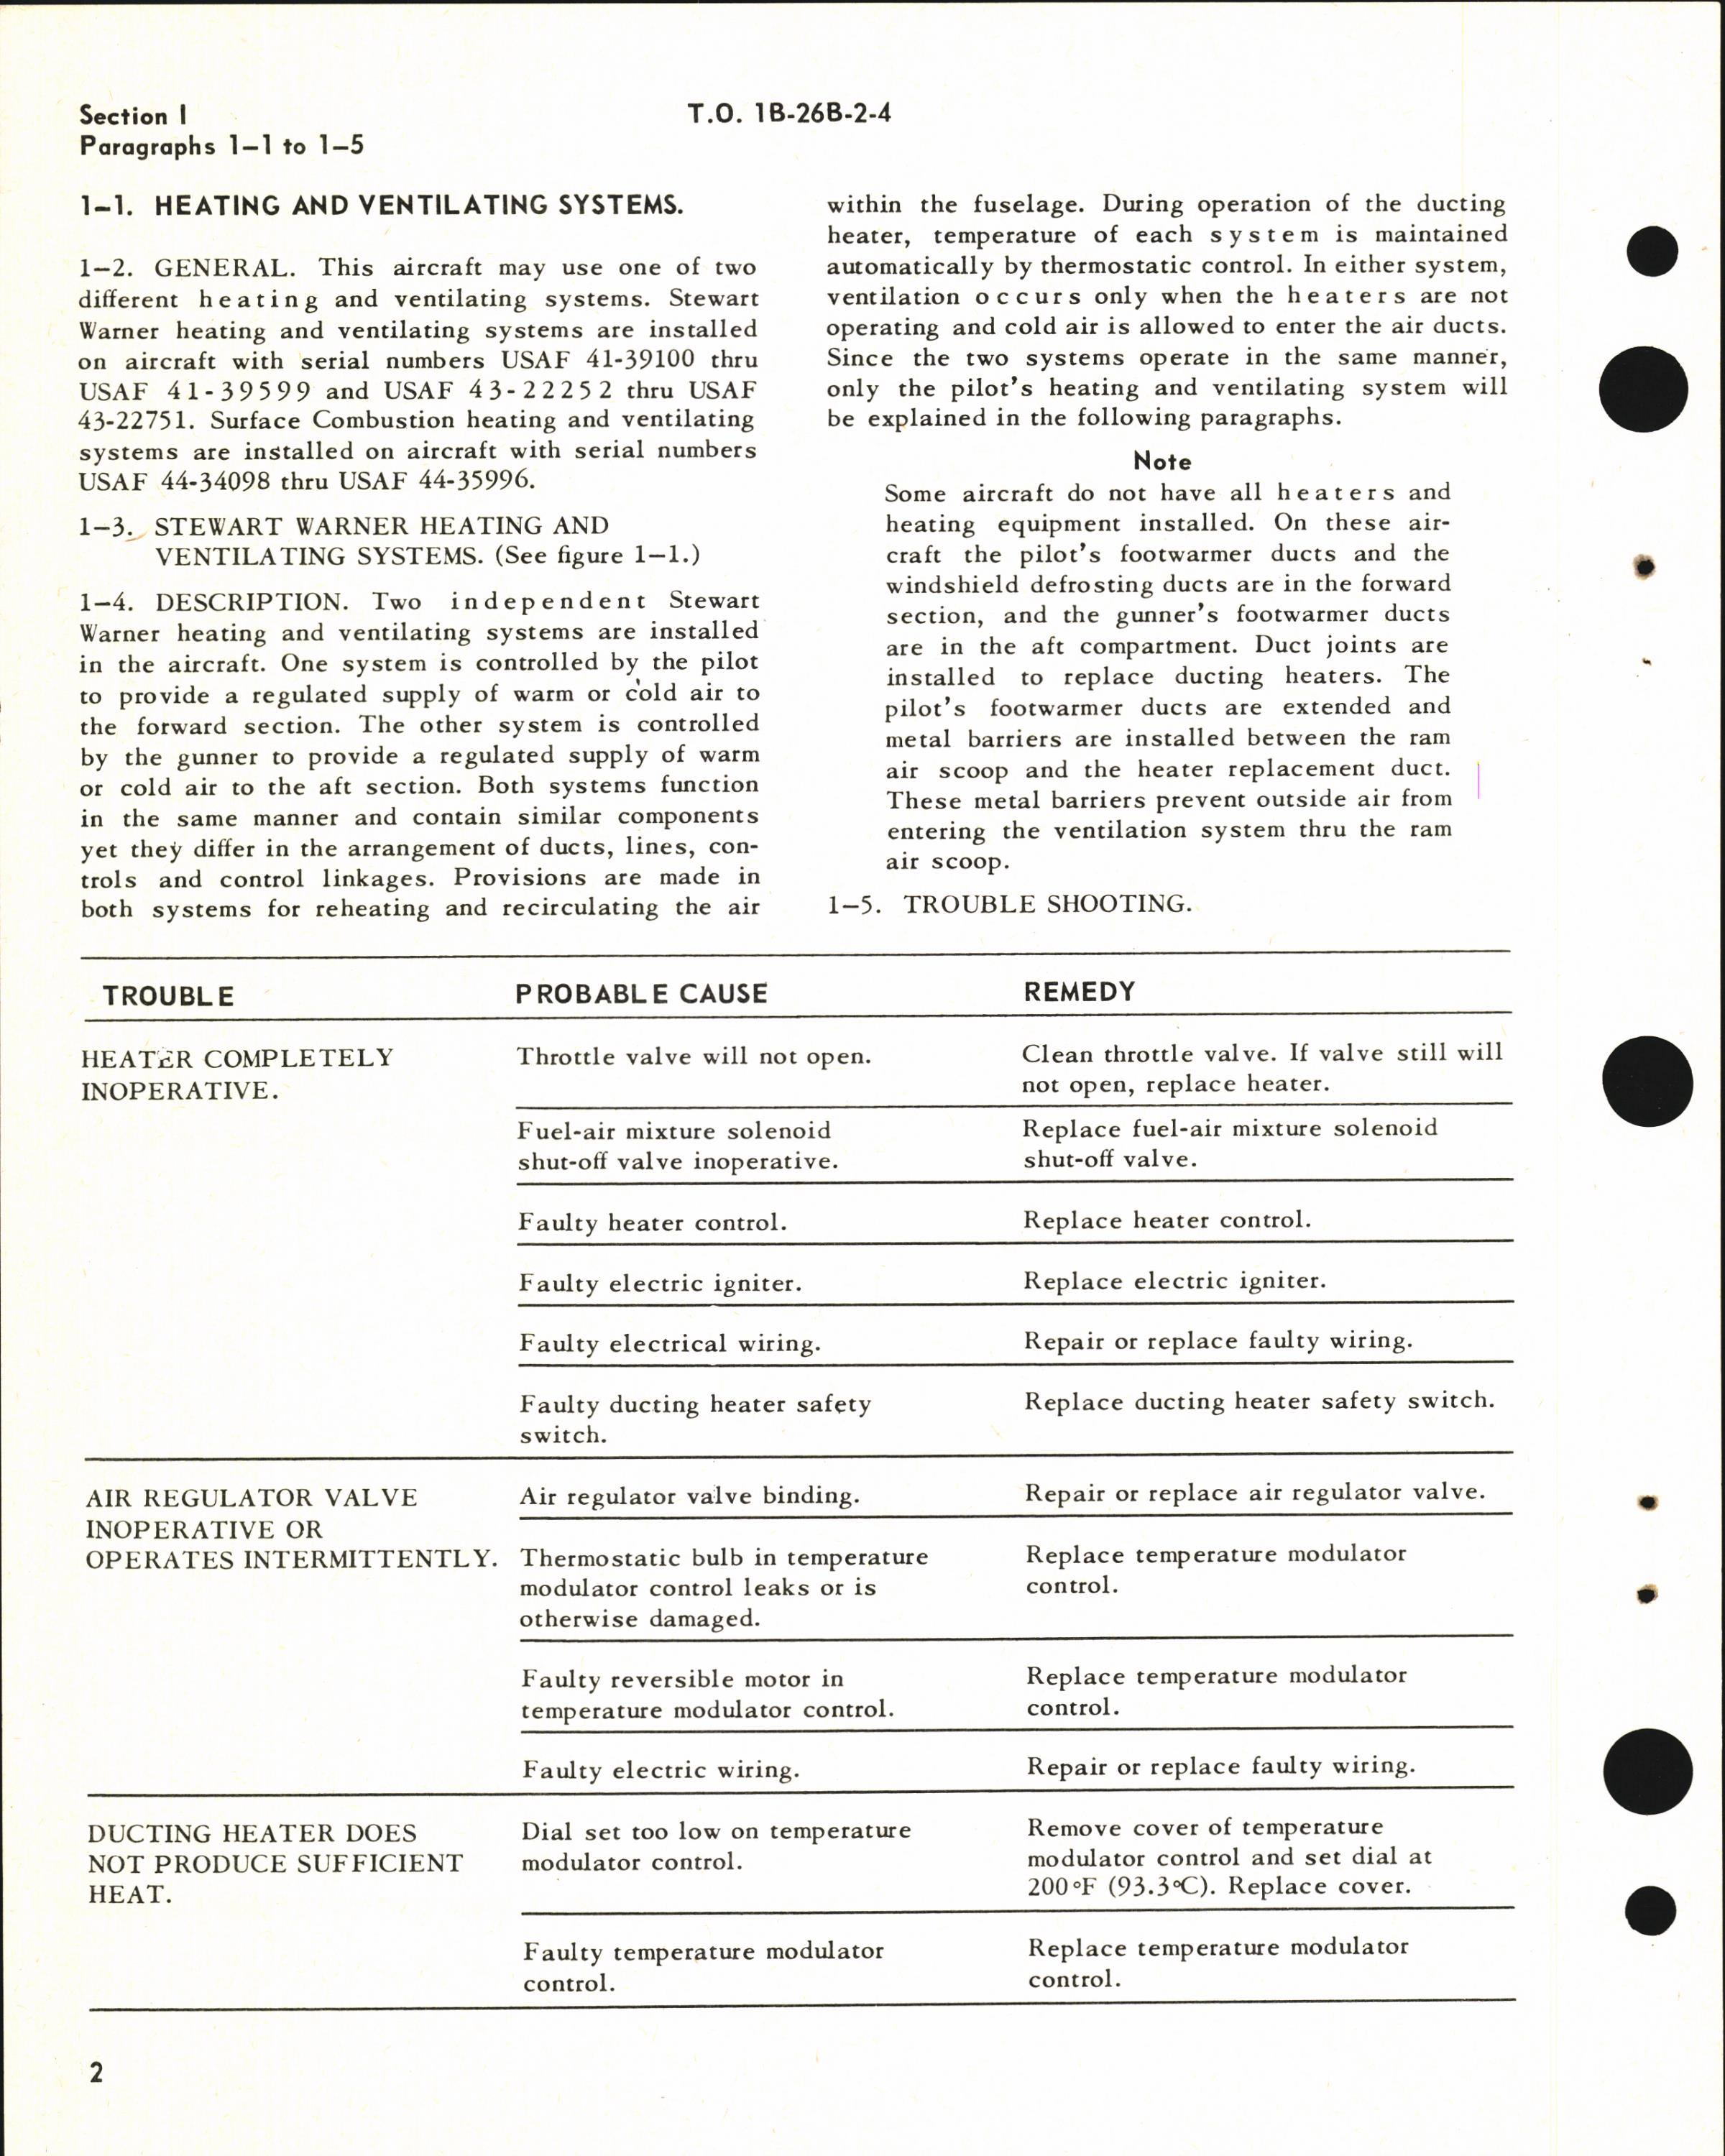 Sample page 8 from AirCorps Library document: Maintenance Instructions for B-26B, B-26C, TB-26B, TB-26C, and JD-1 - Utility Systems